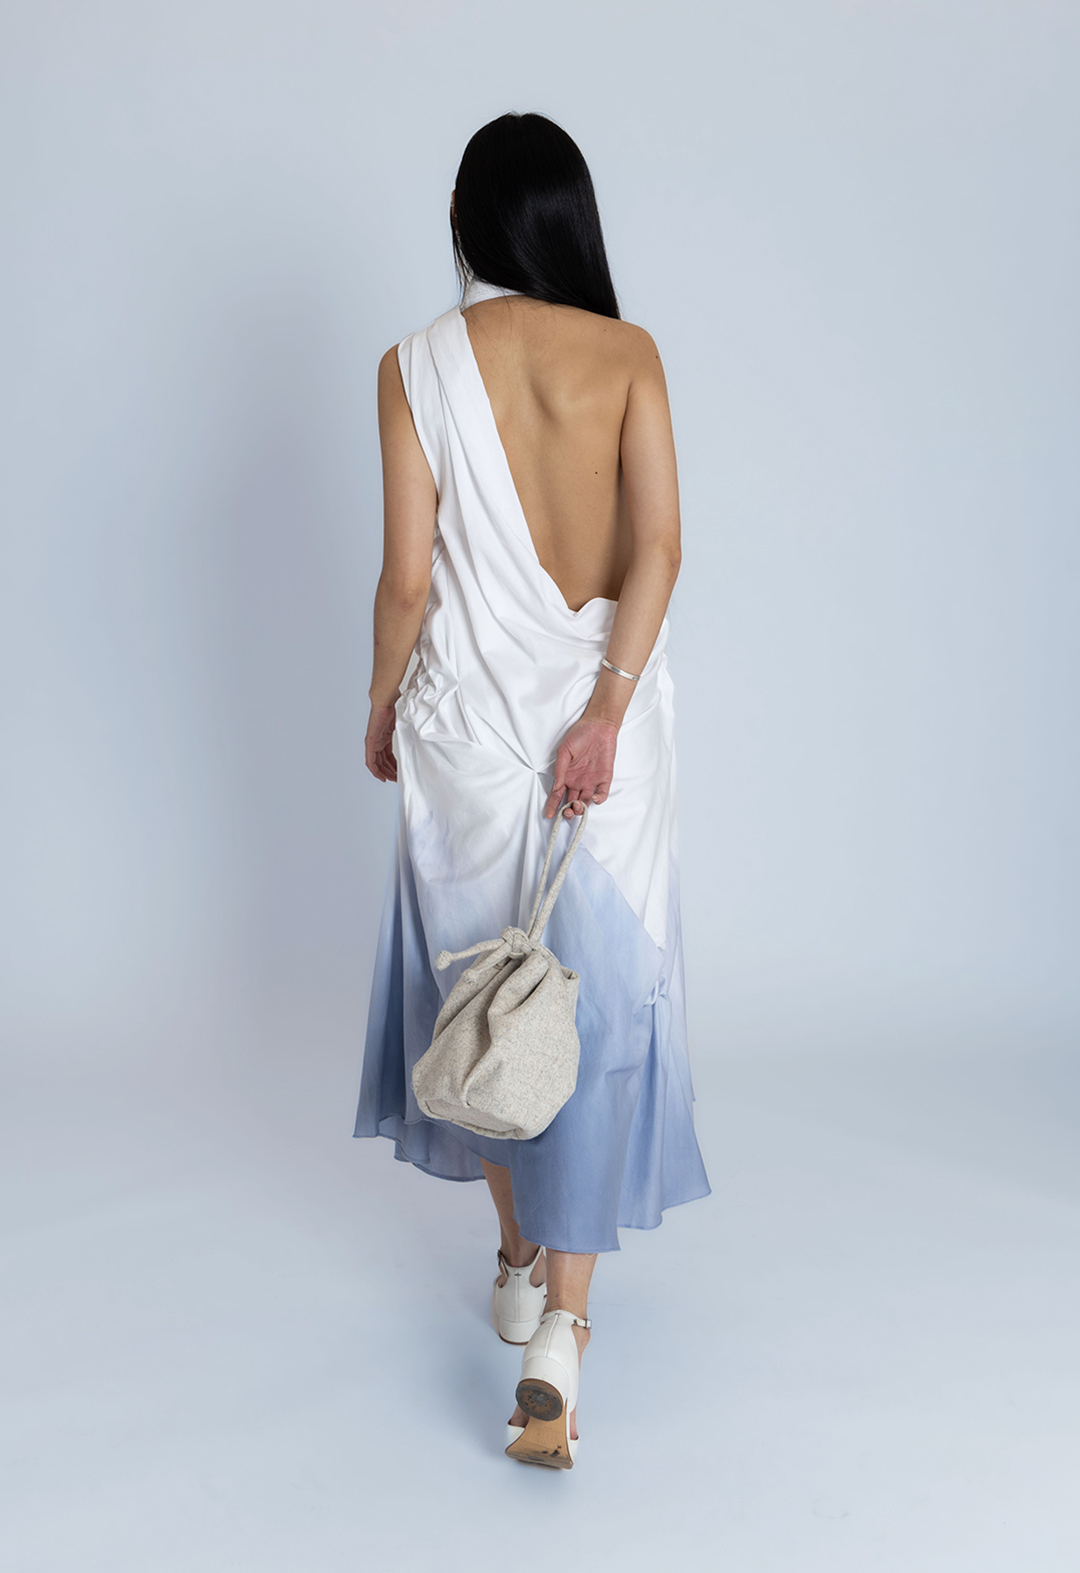 A model presents the back view of a white cotton dress dyed blue at the bottom.